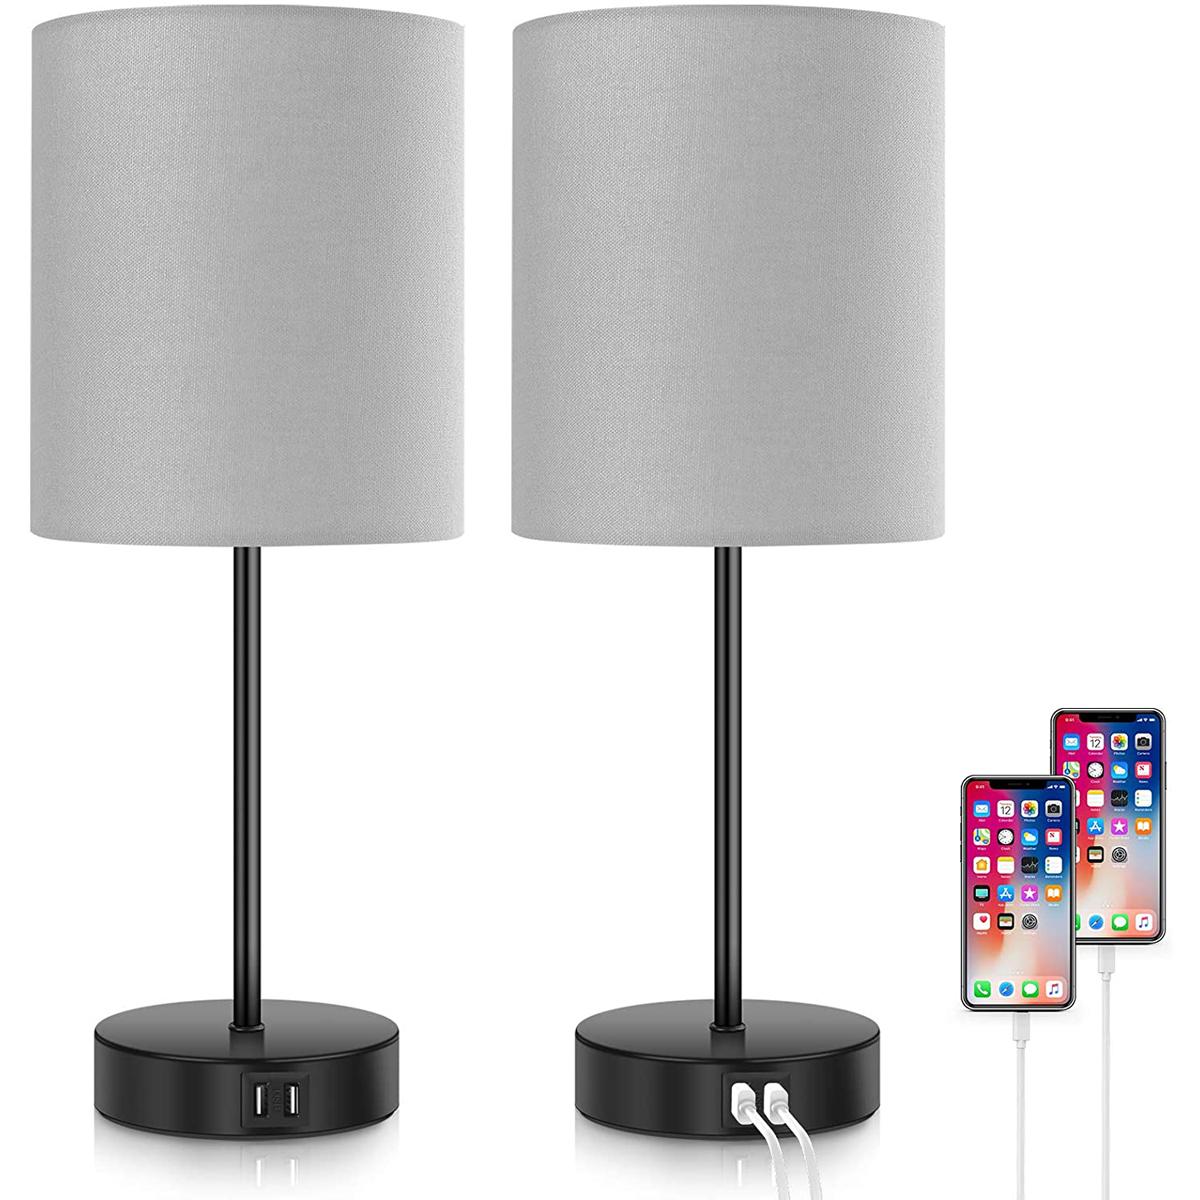 2 Touch Control Dimmable Desk Lamp with 2 USB Ports for $32.99 Shipped